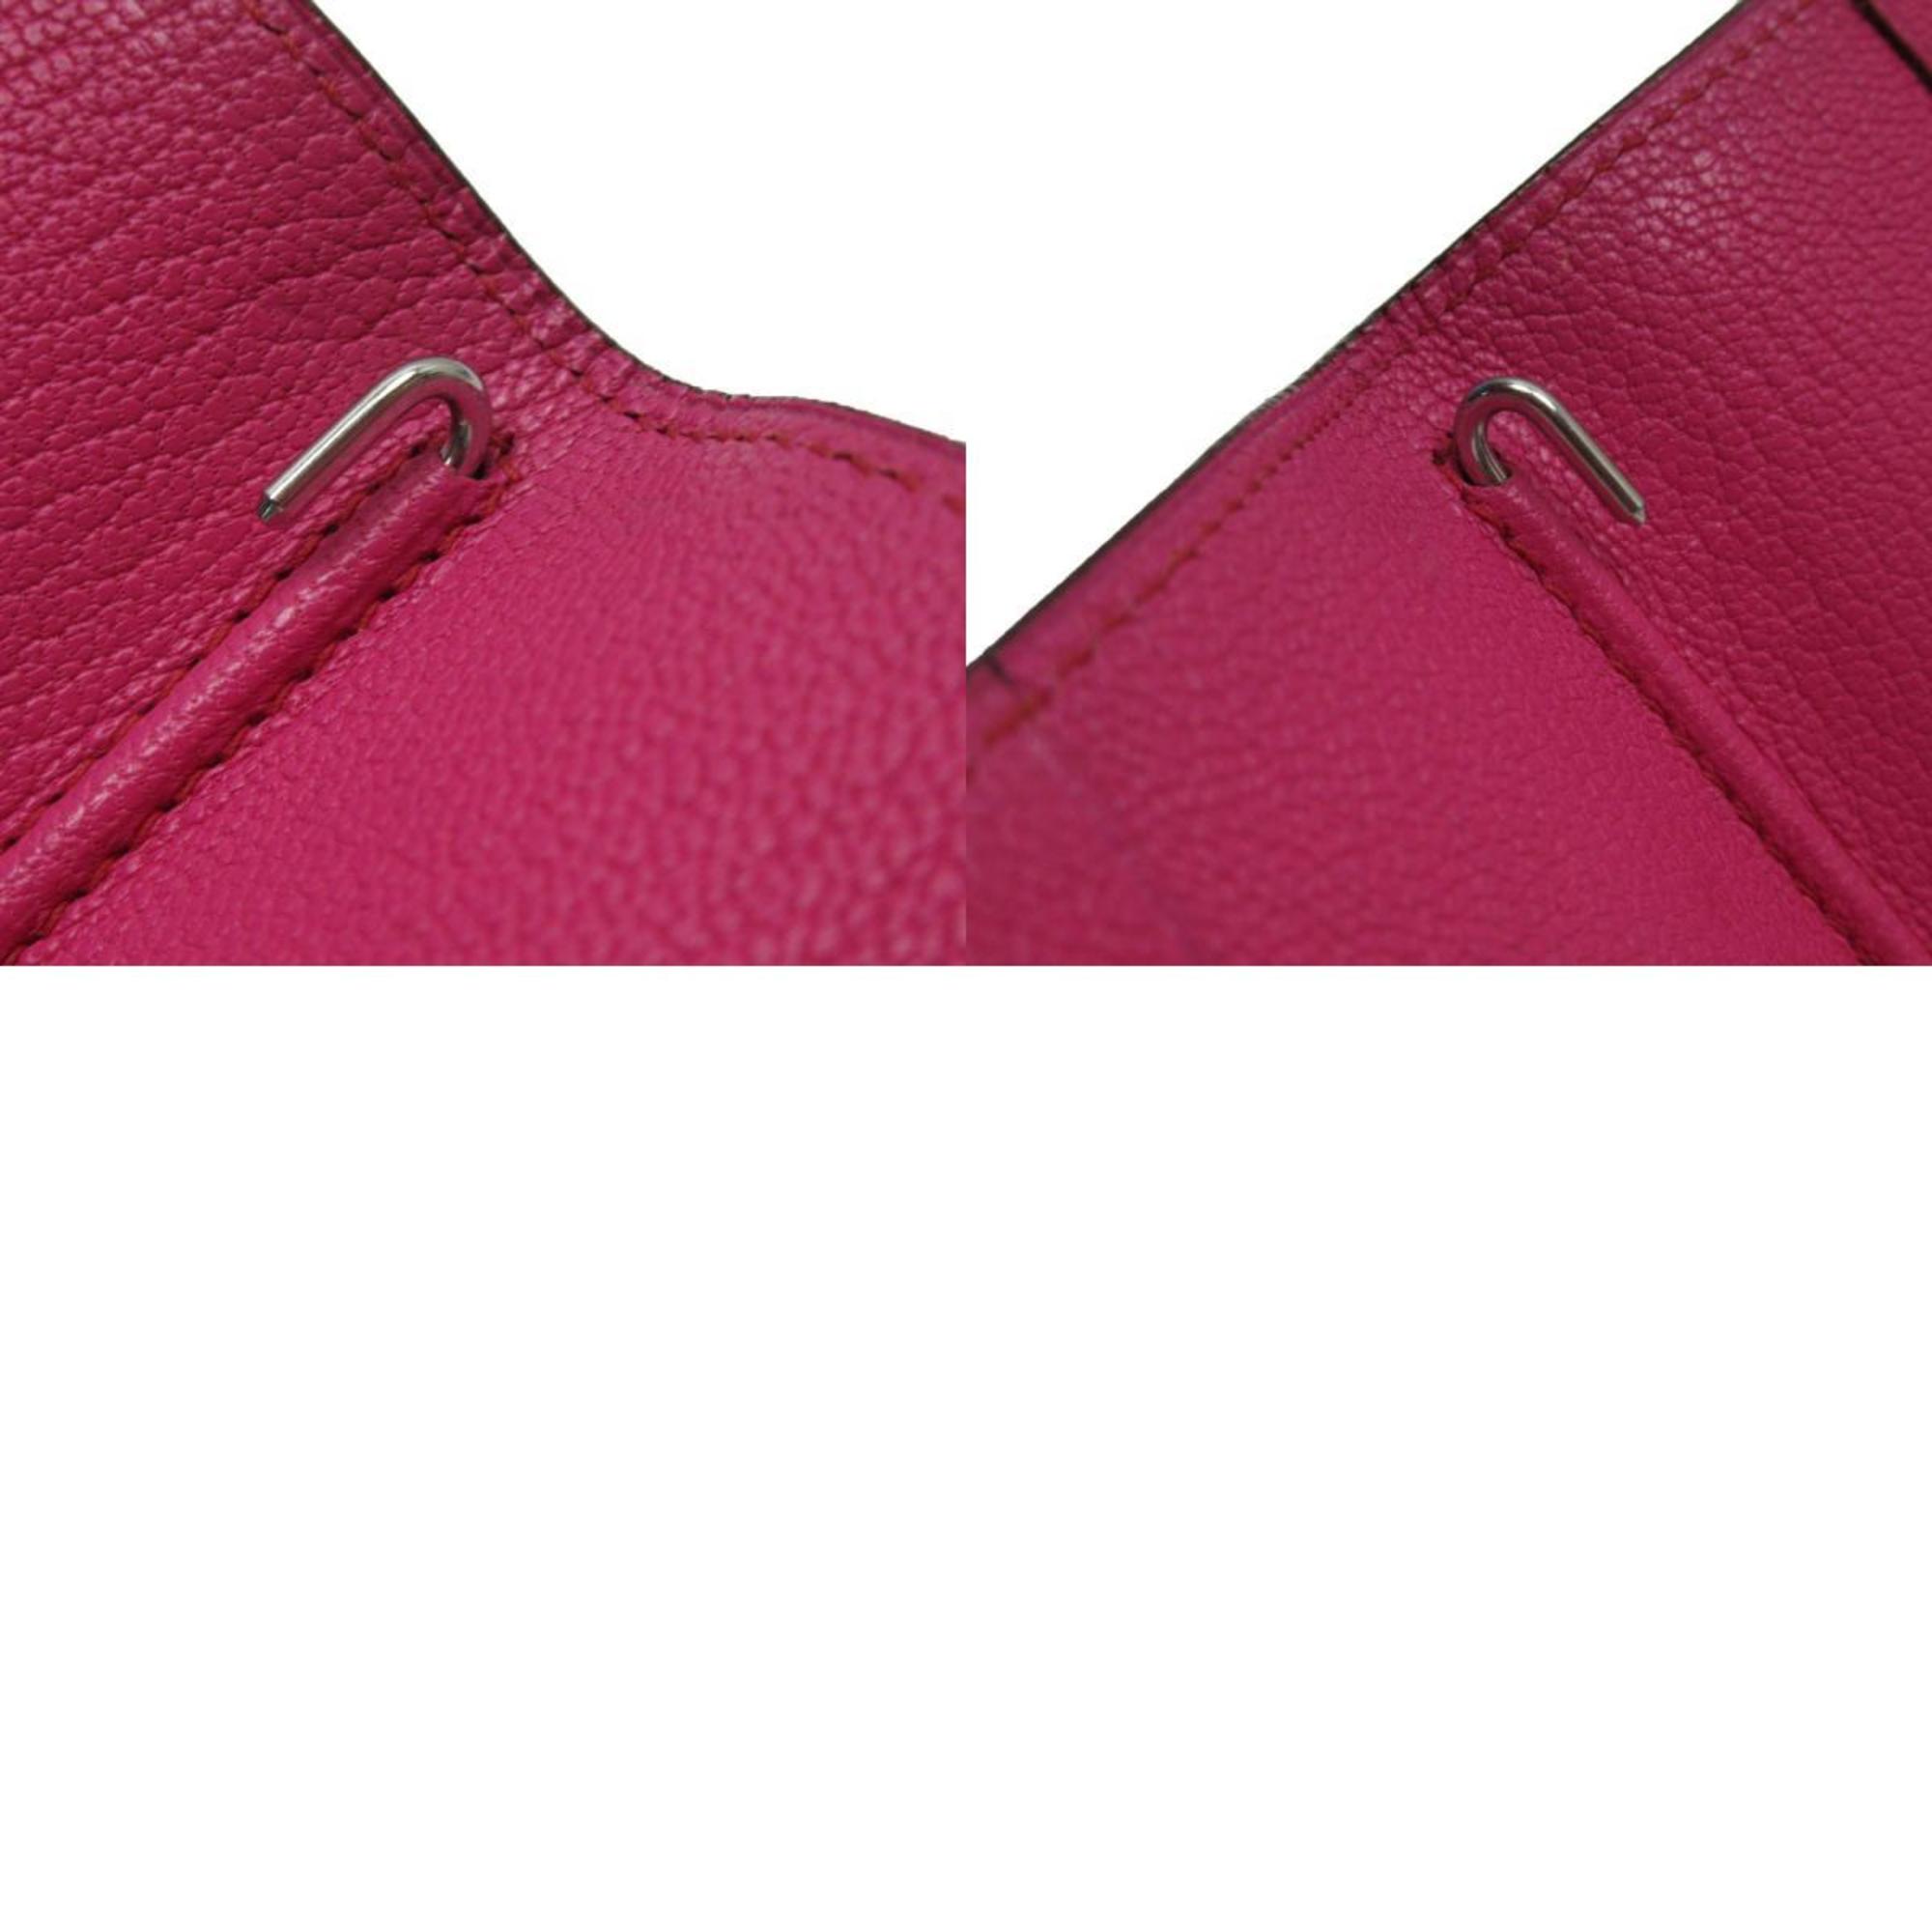 Hermes HERMES Notebook Cover Leather Greige Magenta Women's w0350a